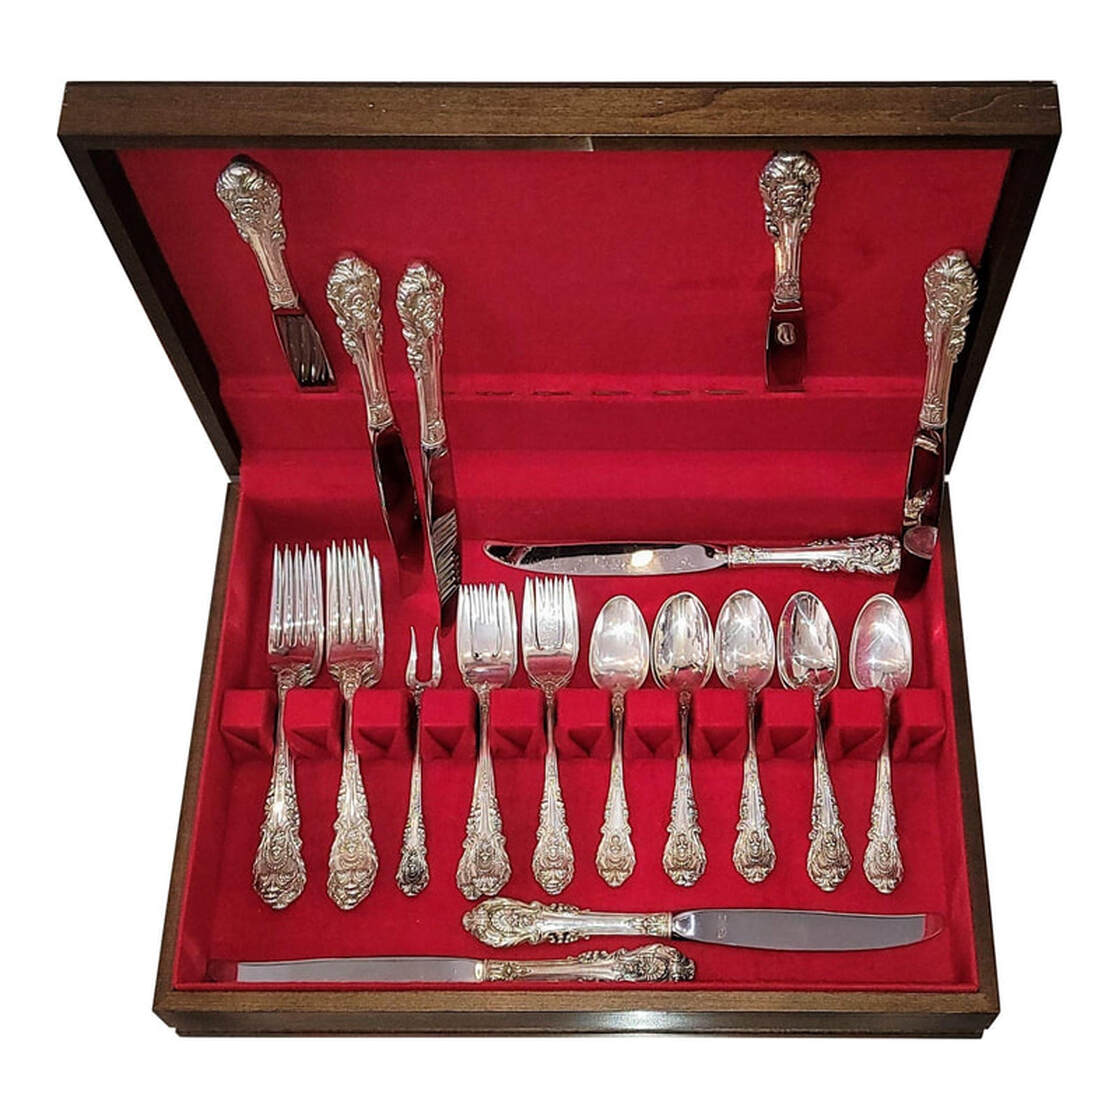 Boxed vintage Sterling Silver flatware set in the Sir Christopher pattern, created and introduced in 1936 by Wallace Silversmiths, Inc / Robert Wallace & Sons, Wallingford, Connecticut.  The Sir Christopher pattern was created to honor renowned British architect Sir Christopher Wren.  The Sir Christopher Pattern was designed by William Warren, the most famous of the Wallace designers. William Warren also designed the Grand Baroque pattern which is considered to be one of the most popular patterns ever produced in Sterling Silver flatware.  The Sir Christopher pattern is an English Renaissance style with an intricate chased design.  The pattern was advertised until about 1950.  The set includes:  8 Hollow Ware Knives at 9